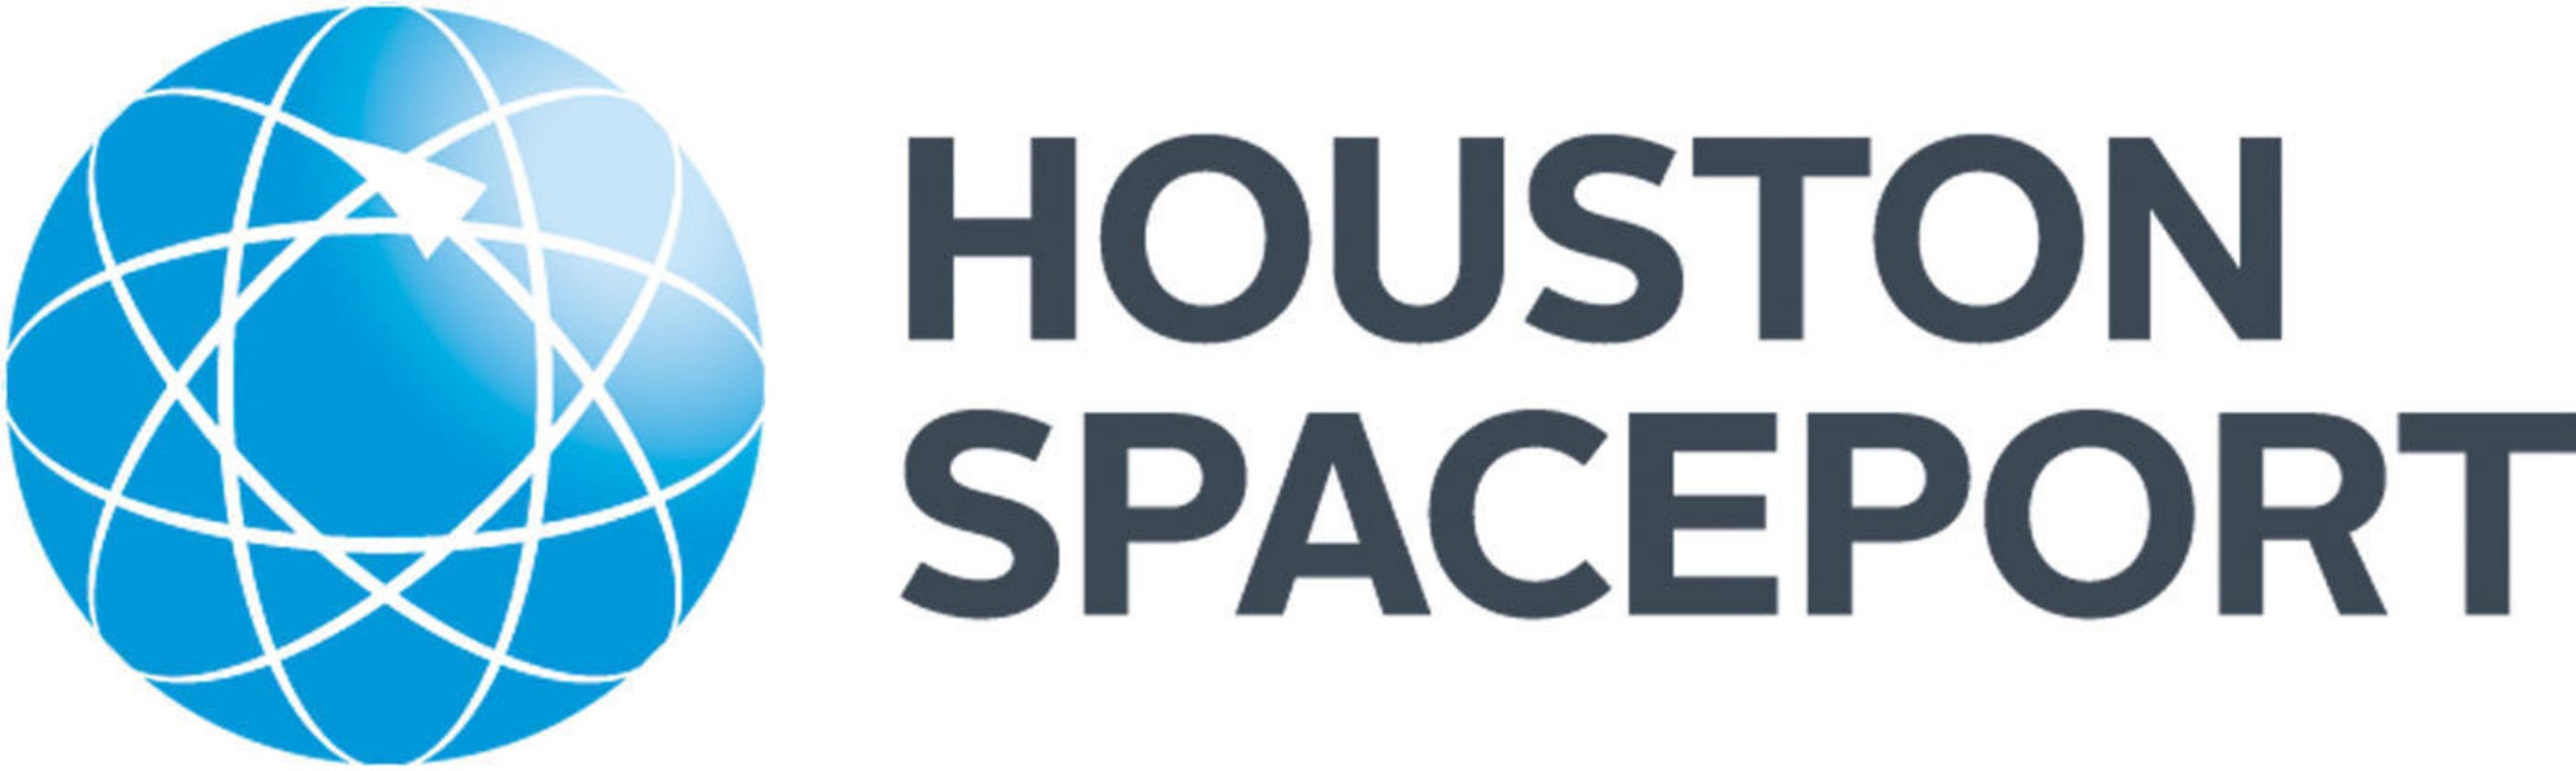 Houston spaceport lecture logo